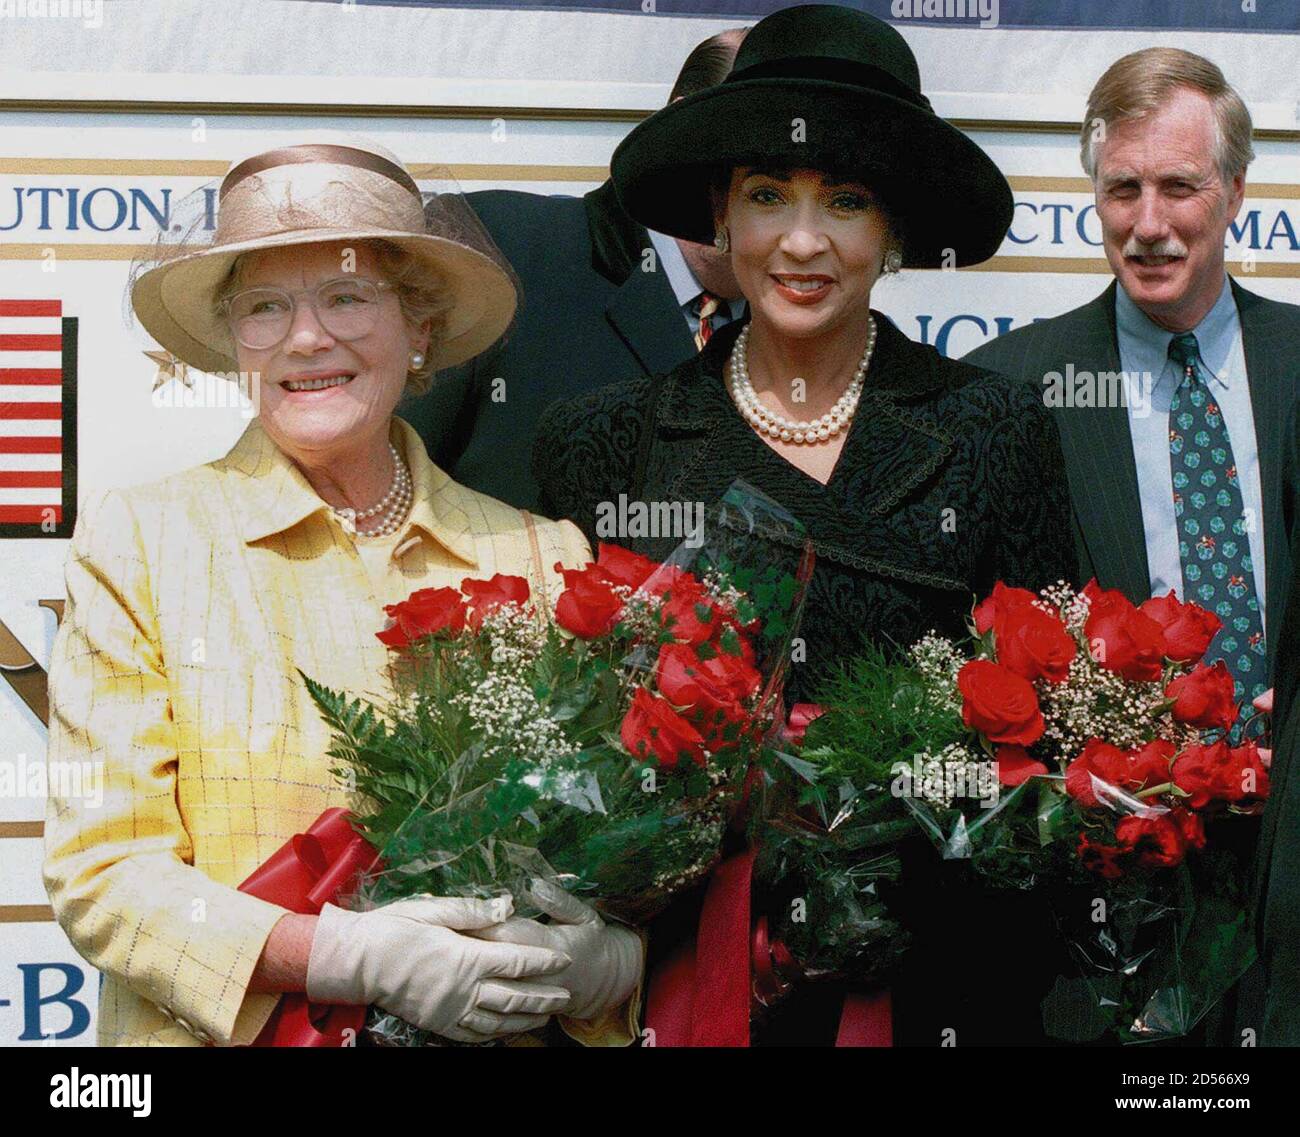 The Lady Mary Churchill Soames (L), the last surviving child of Winston S. Churchill, poses with Janet Langhart Cohen, wife of U. S. Secretary of Defense William Cohen, before the launching of the Winston S. Churchill, an Arleigh Burke Class Aegis guided missile destroyer, at Bath Iron Works in Bath, April 17. Maine Governor Angus King look on at rear, right.  HB/RC Stock Photo